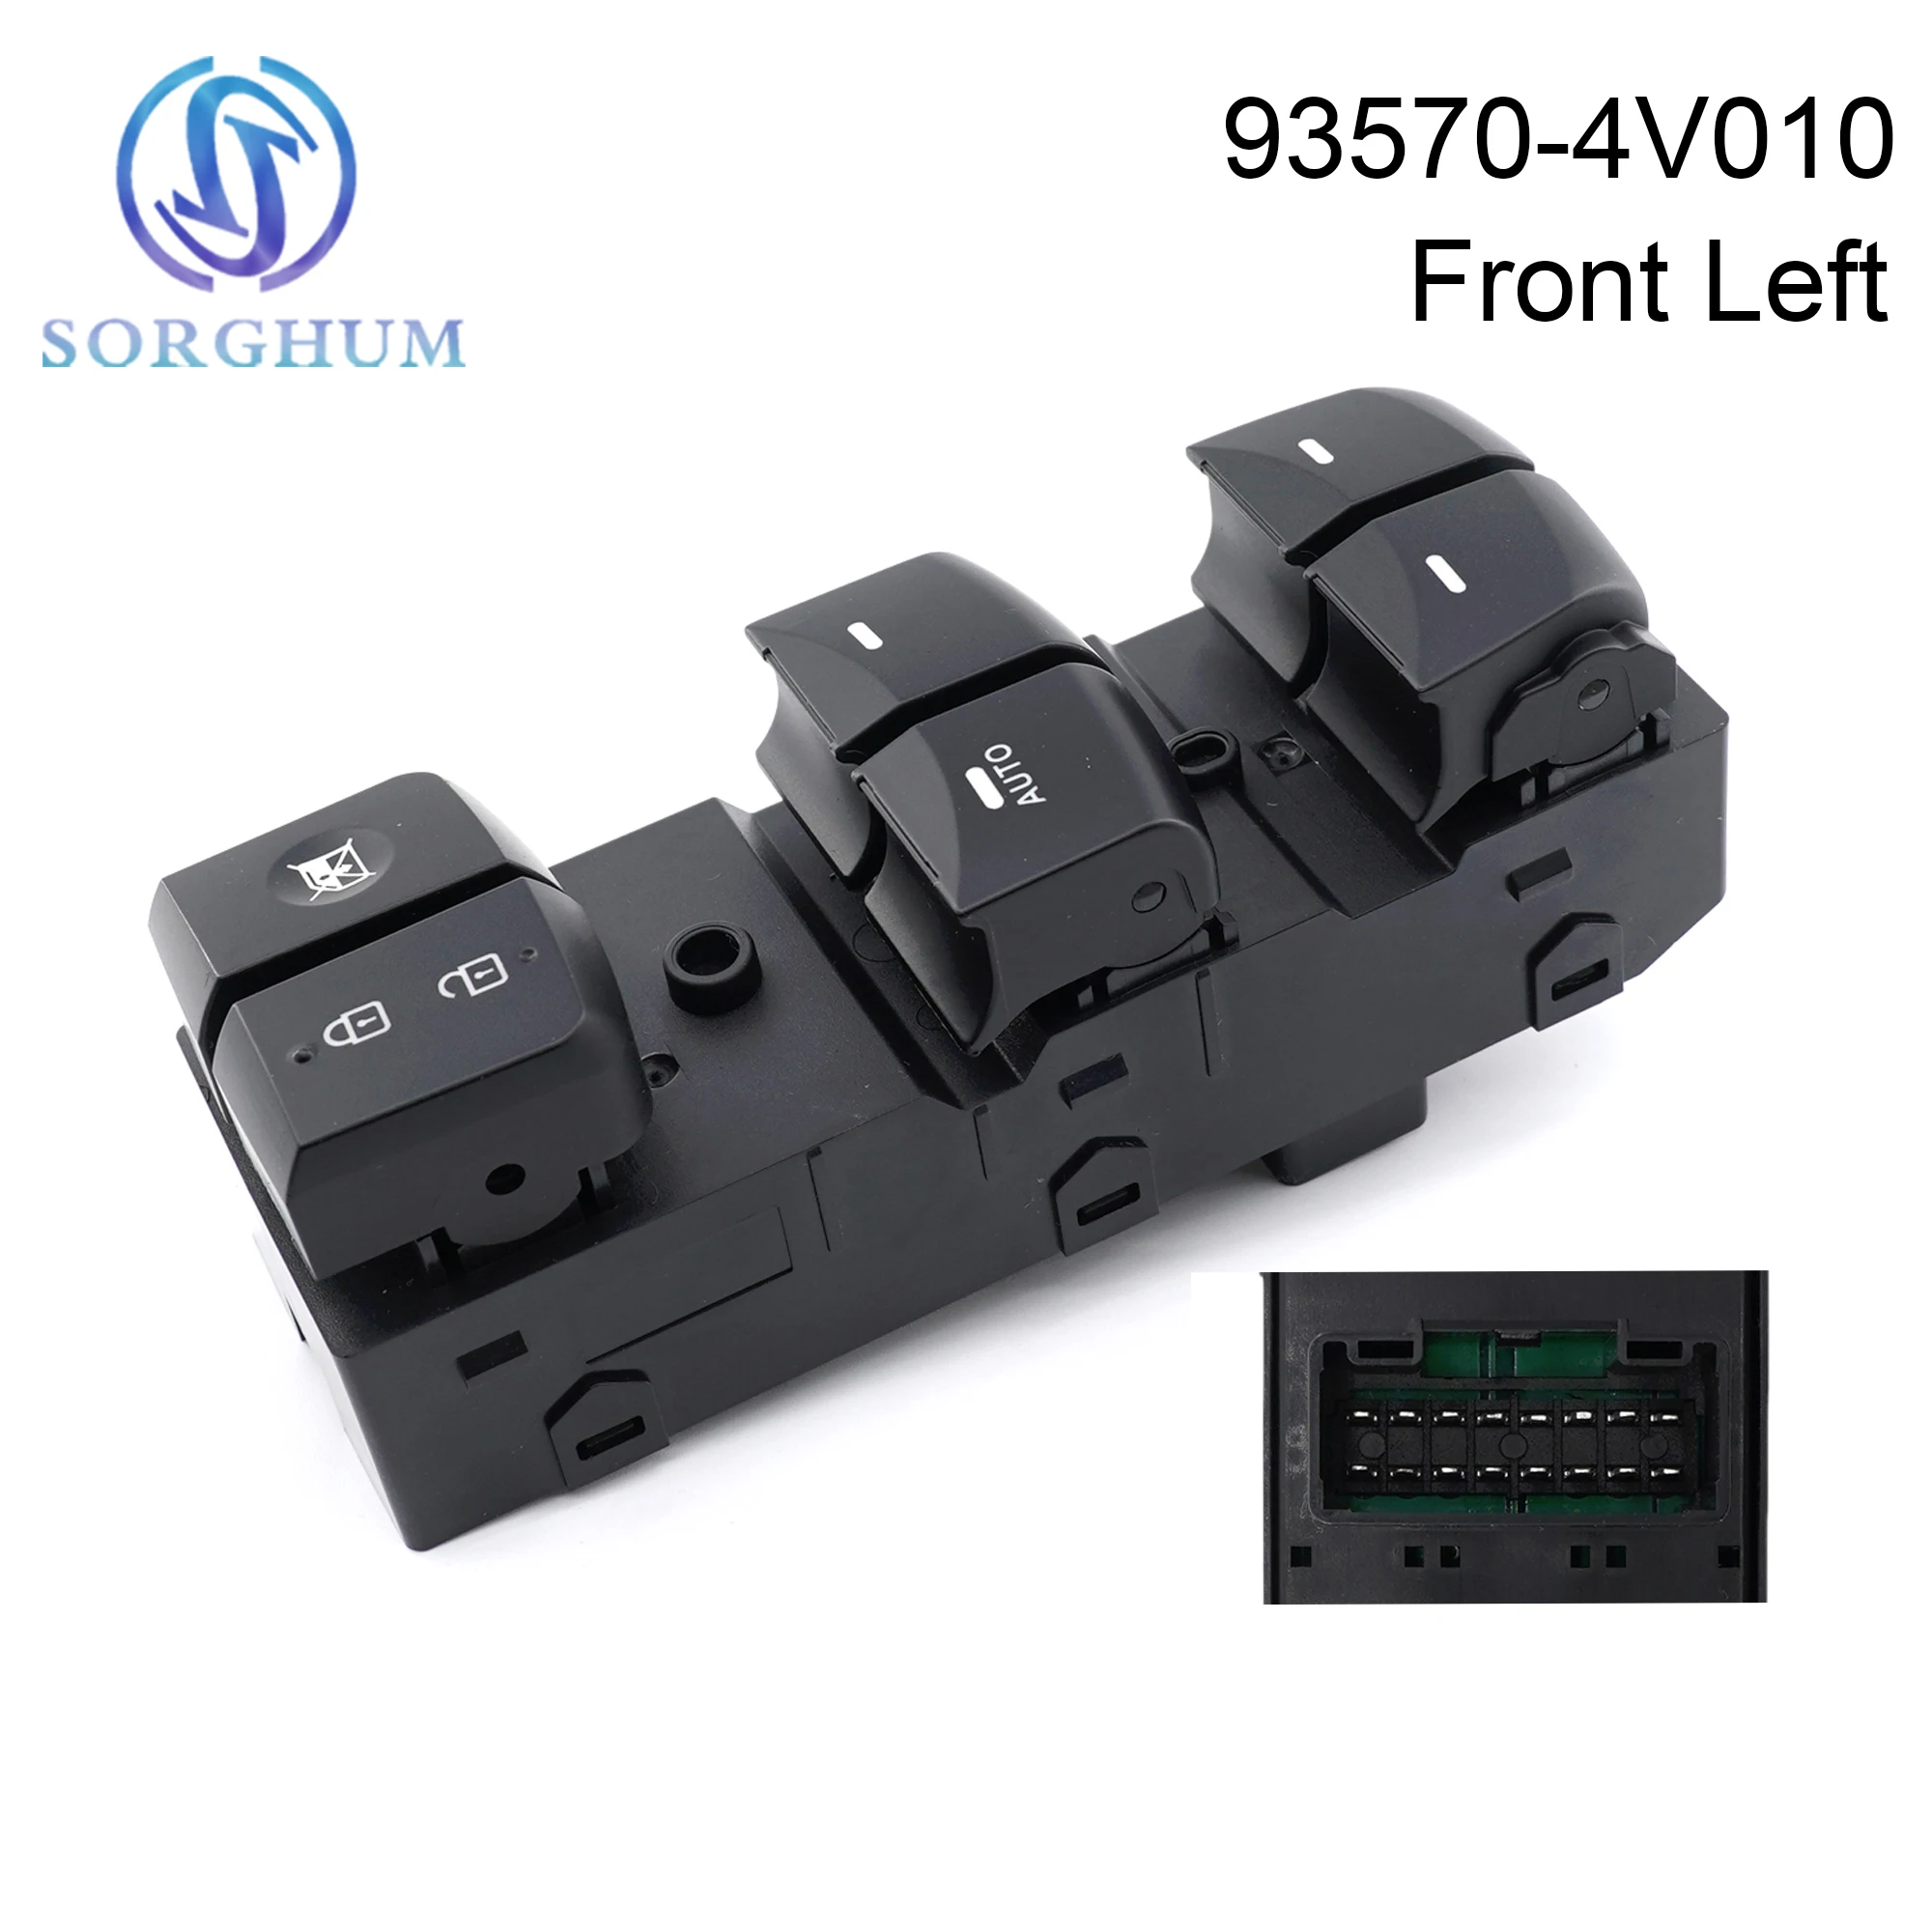 

Sorghum 93570-4V010 Electric Power Window Master Switch Front Left Auto Lifter Button For Hyundai Elantra 2012-2016 93570-3X000